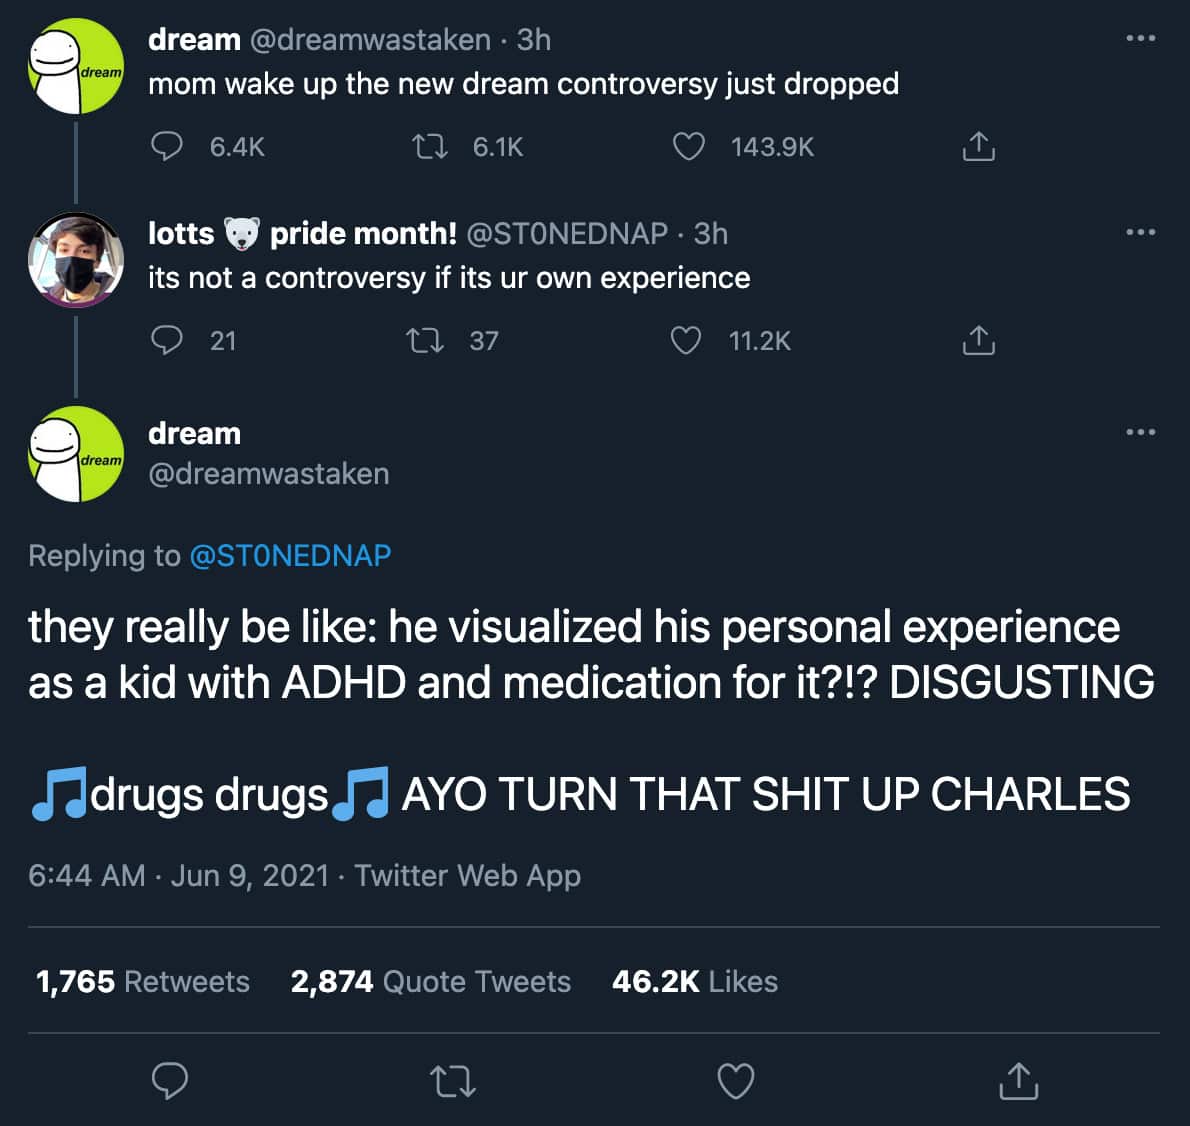 Dream tweets about ADHD controversy